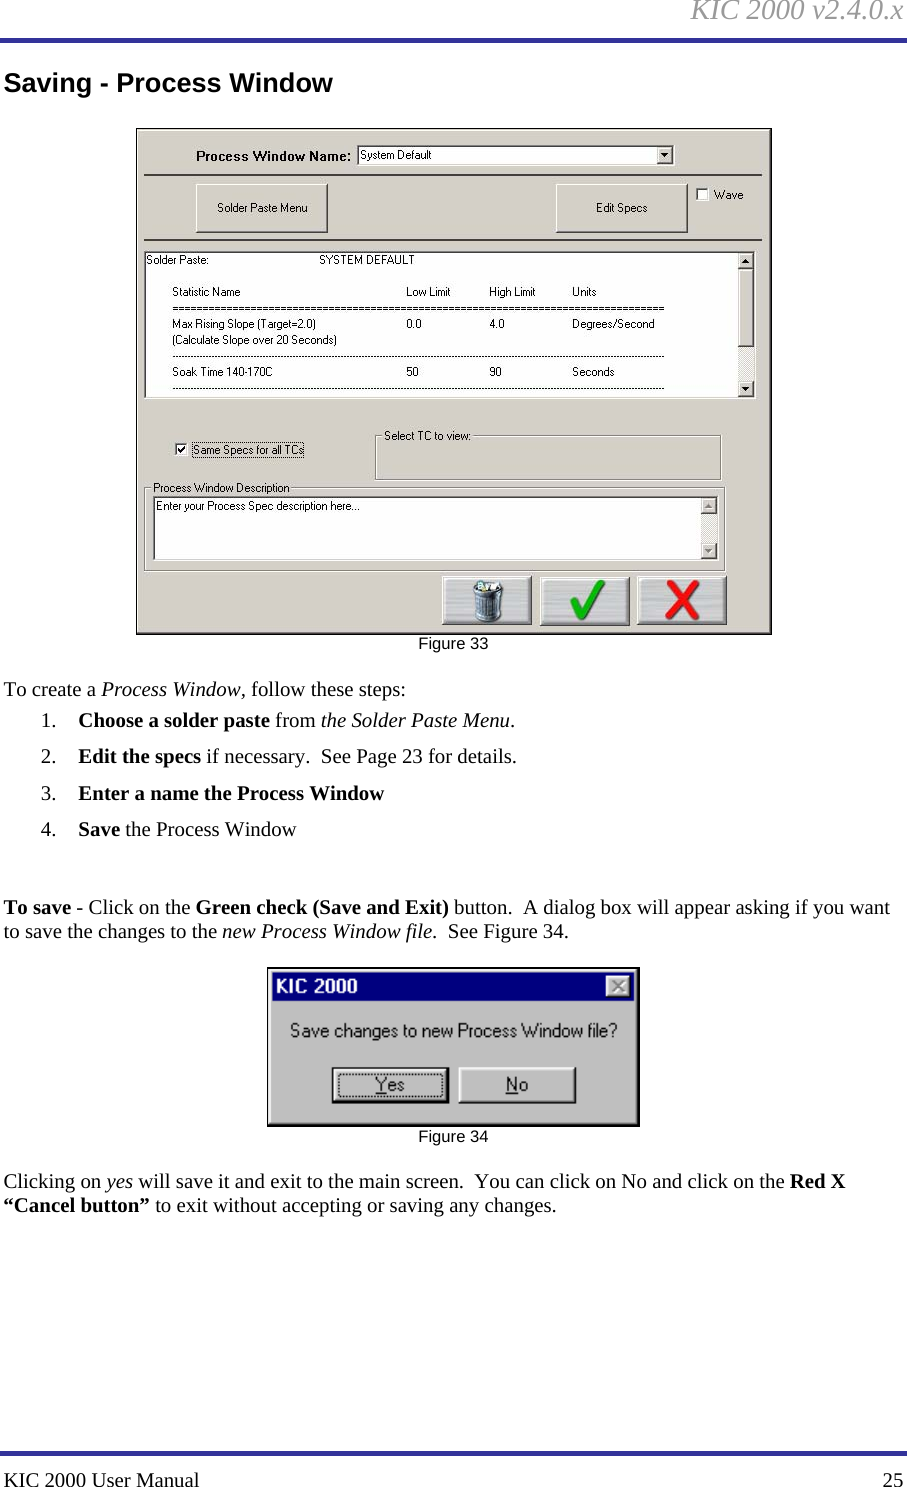 KIC 2000 v2.4.0.x KIC 2000 User Manual    25 Saving - Process Window   Figure 33  To create a Process Window, follow these steps: 1. Choose a solder paste from the Solder Paste Menu. 2. Edit the specs if necessary.  See Page 23 for details. 3. Enter a name the Process Window 4. Save the Process Window    To save - Click on the Green check (Save and Exit) button.  A dialog box will appear asking if you want to save the changes to the new Process Window file.  See Figure 34.     Figure 34  Clicking on yes will save it and exit to the main screen.  You can click on No and click on the Red X “Cancel button” to exit without accepting or saving any changes.    